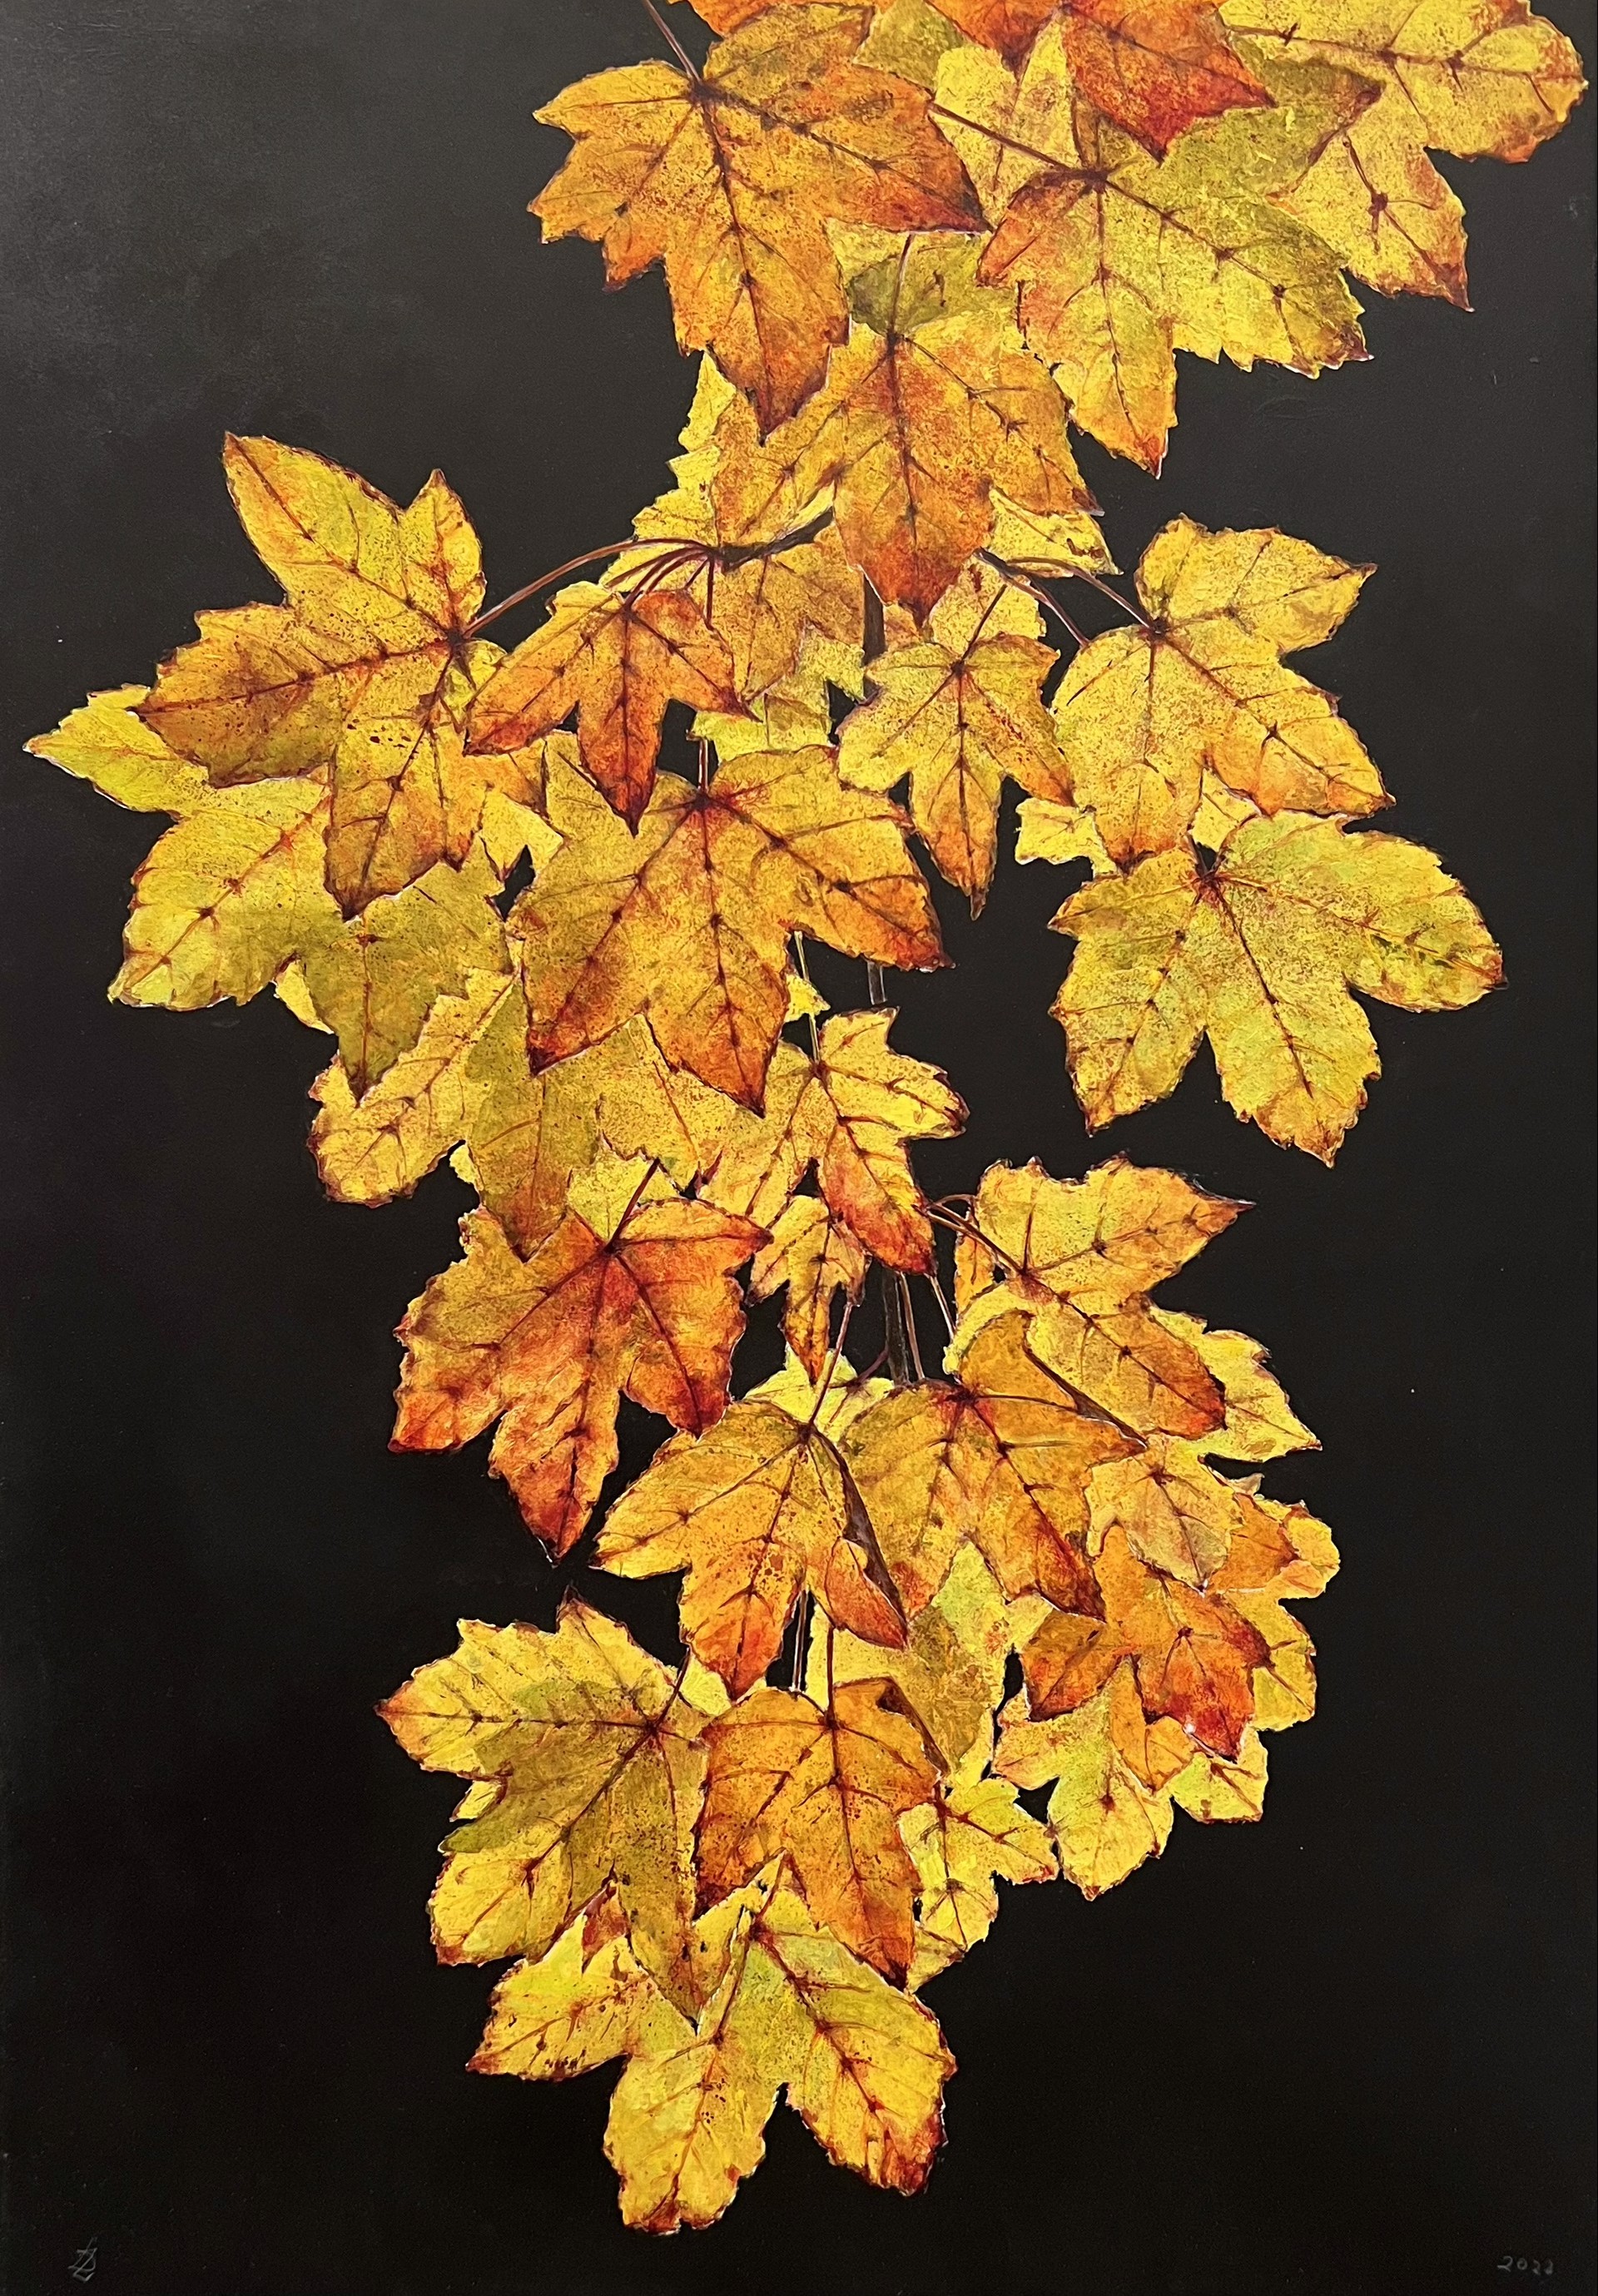 Golden Leaves by Ottorino De Lucchi